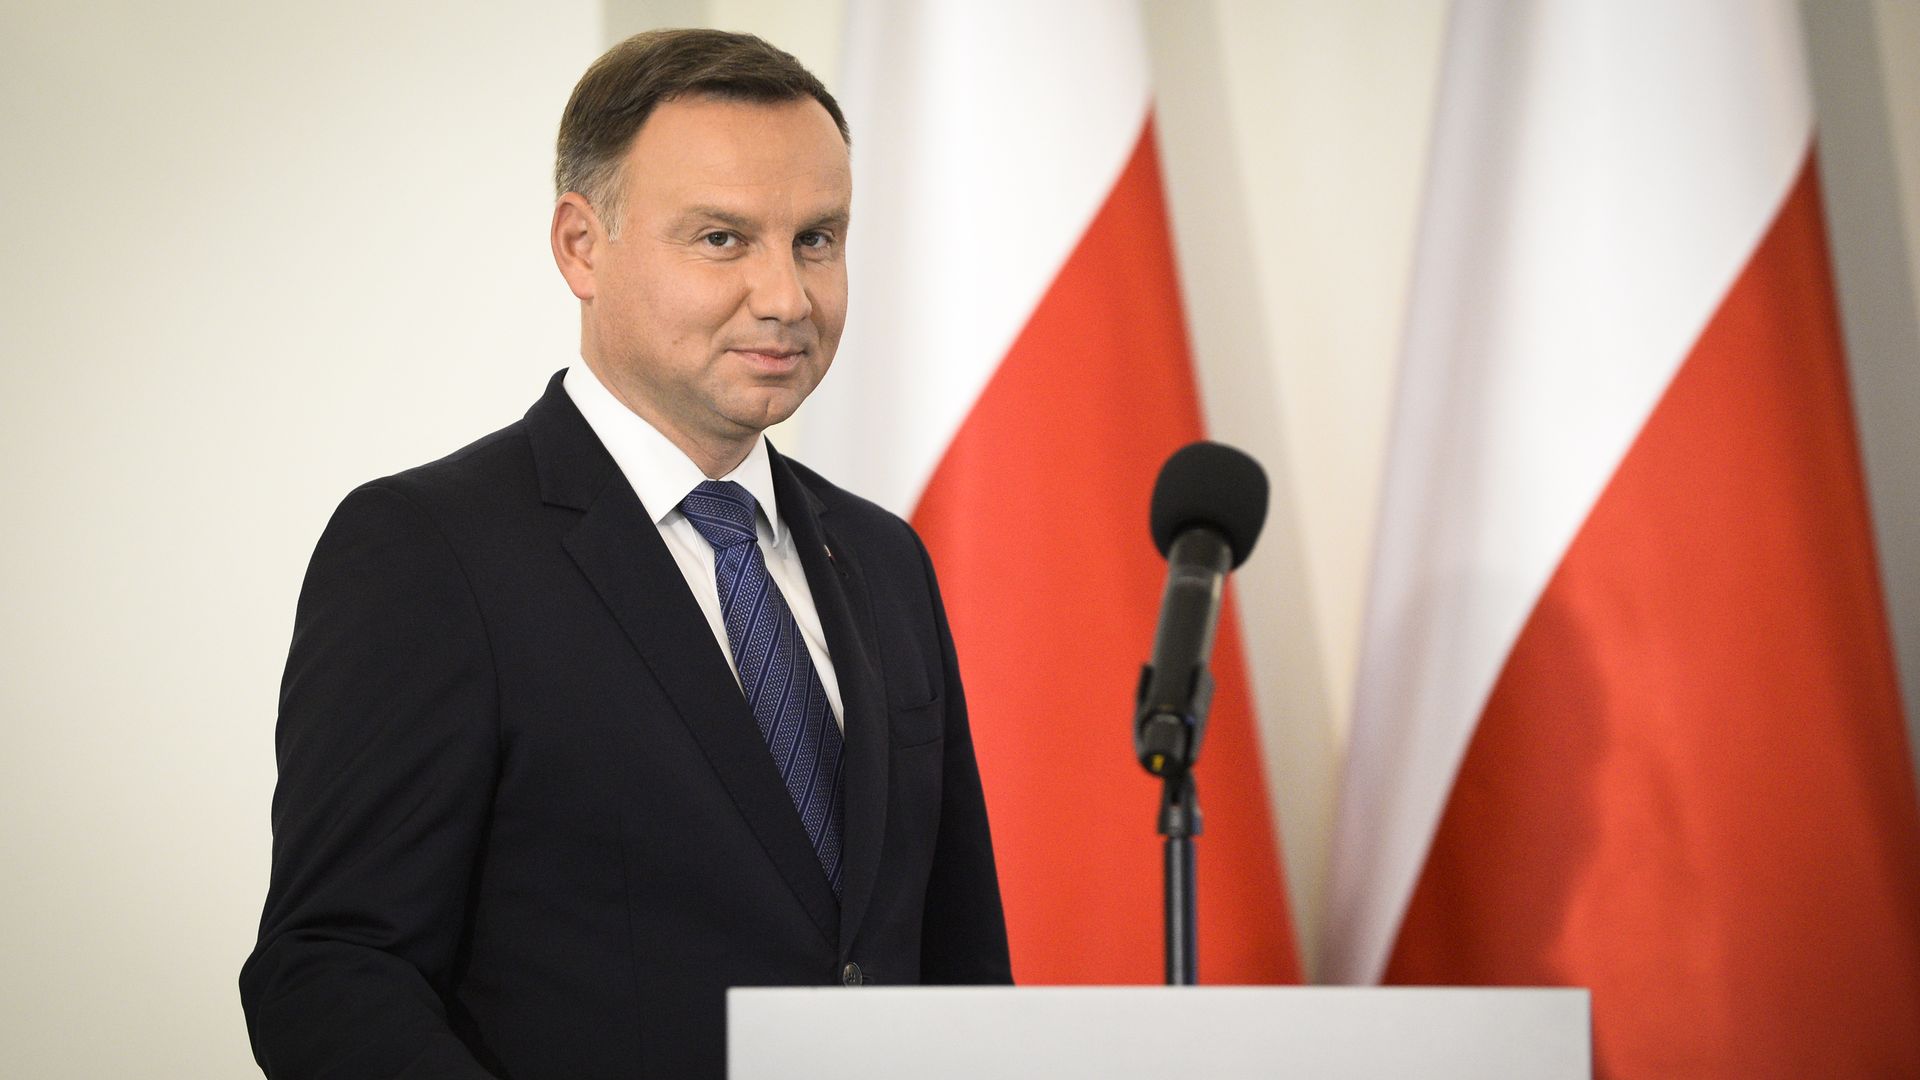 President Duda announces recipients of the Order of the White Eagle at at the Presidential Palace in Warsaw, Poland on September 12, 2018.